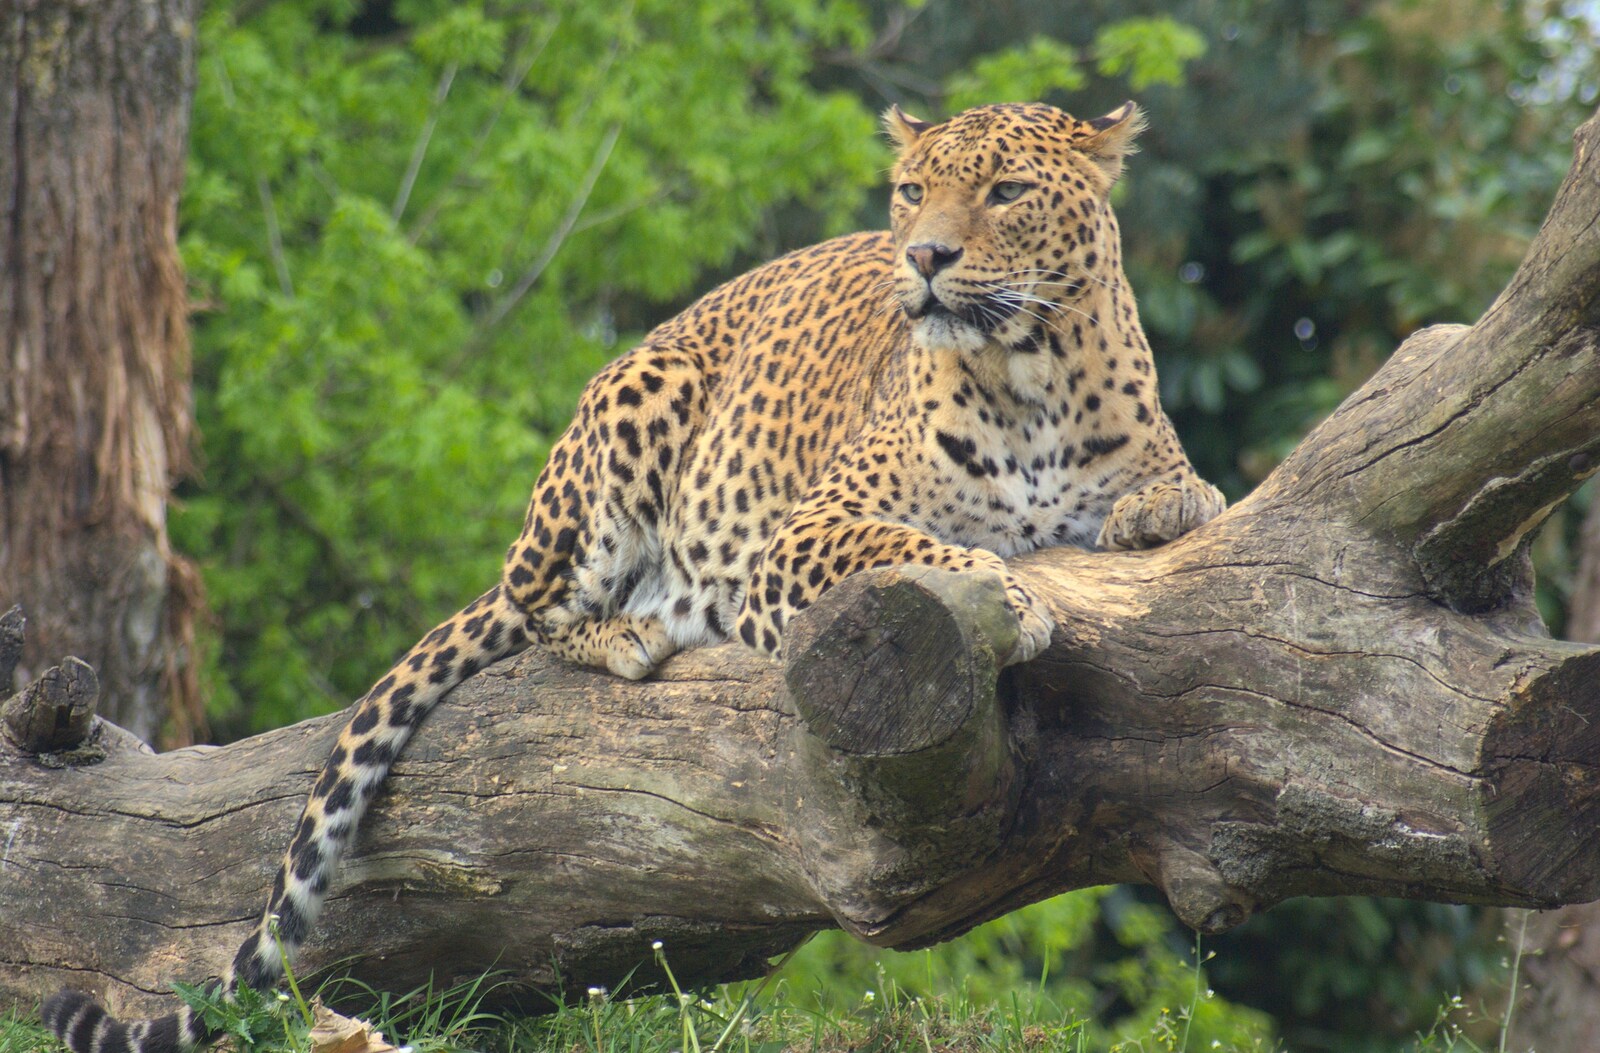 Cheetah in a tree from Another Day at the Zoo, Banham, Norfolk - 2nd May 2011